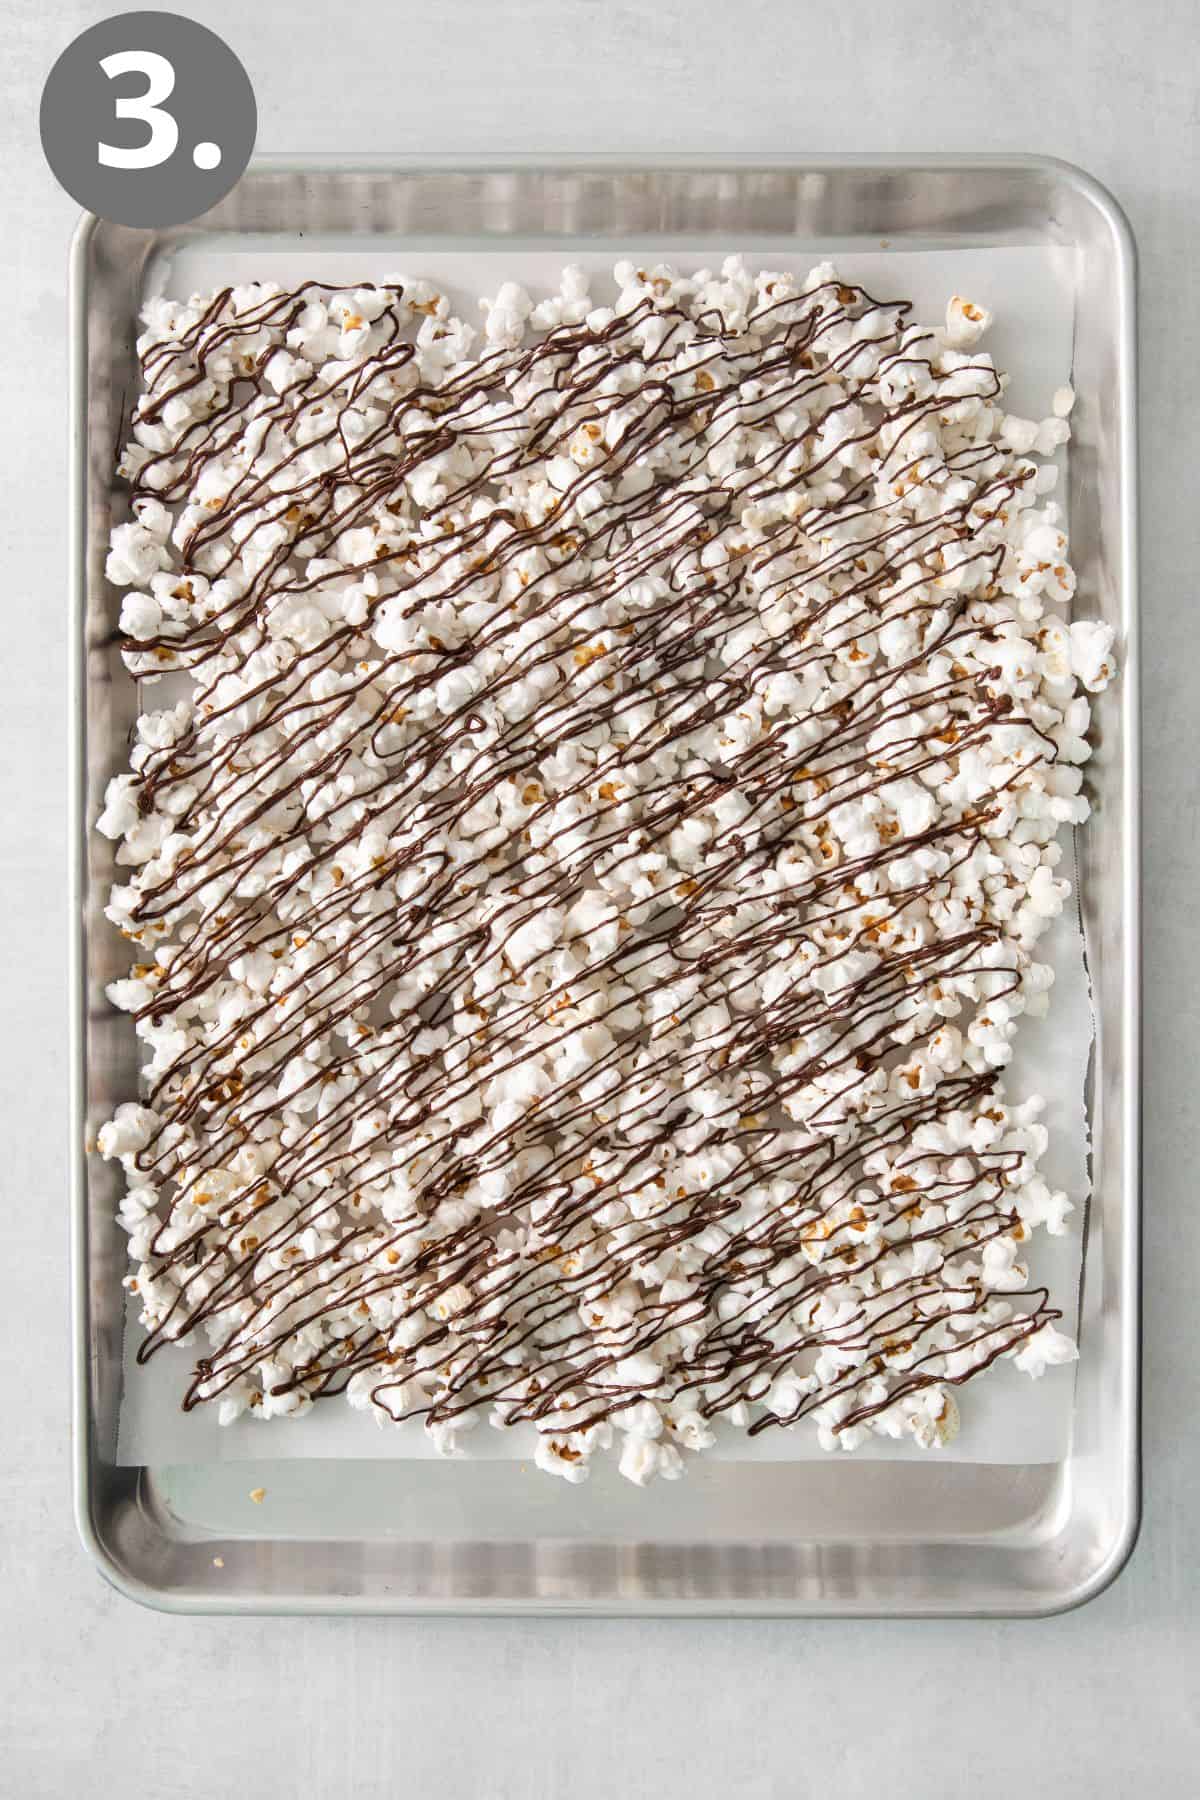 Melted chocolate drizzled over popcorn on a baking sheet